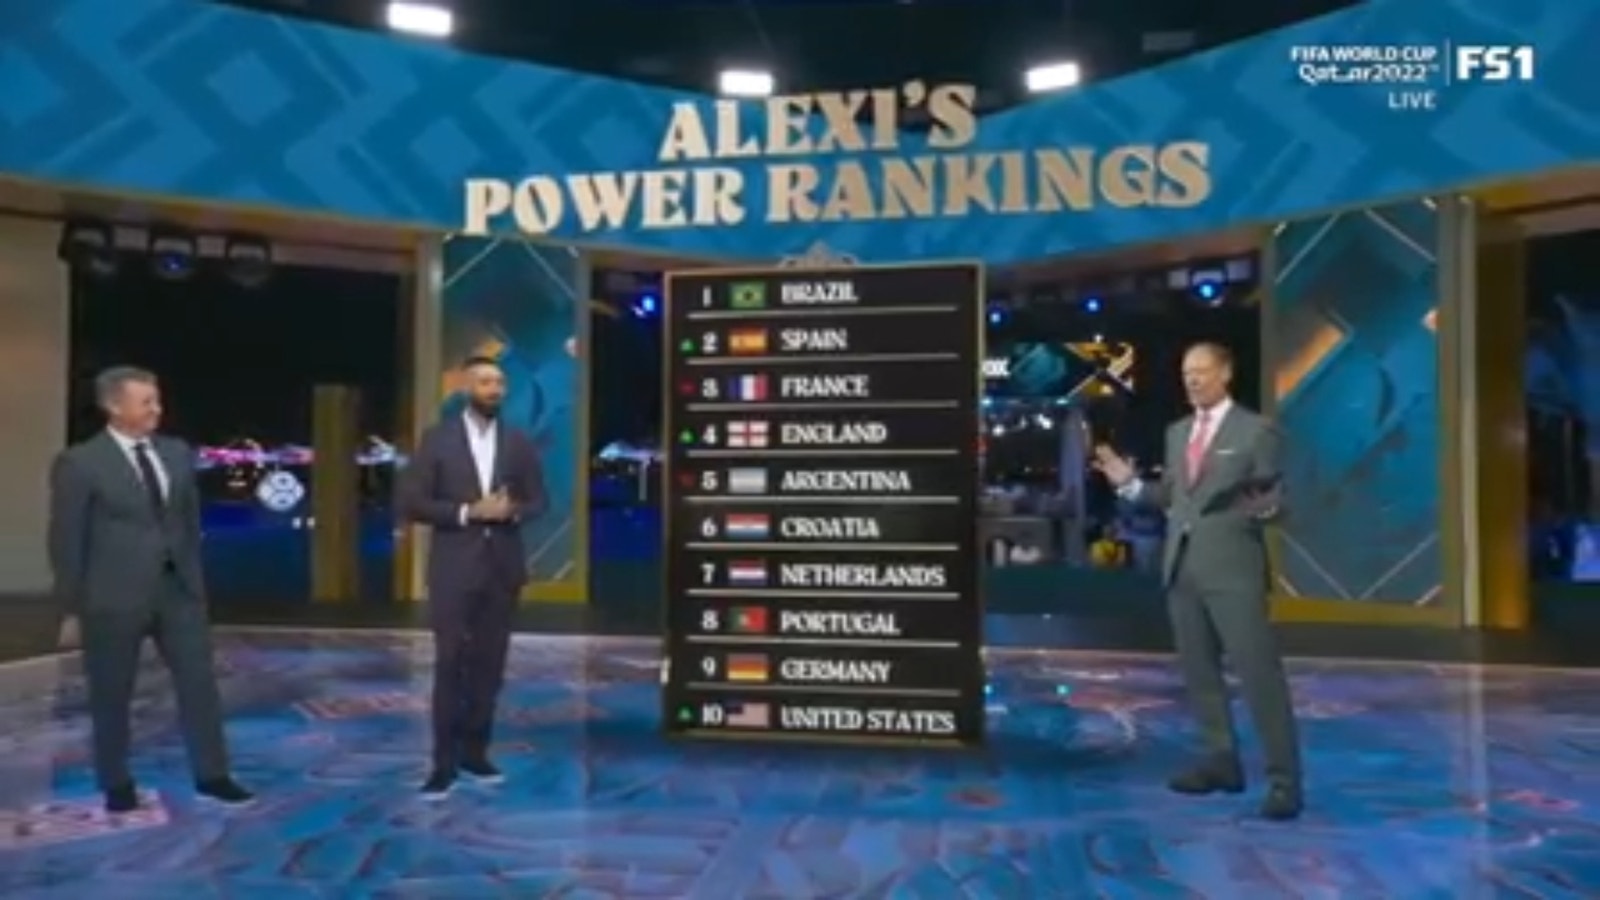 England, Spain and USMNT rise in Alexi Lalas' World Cup power rankings